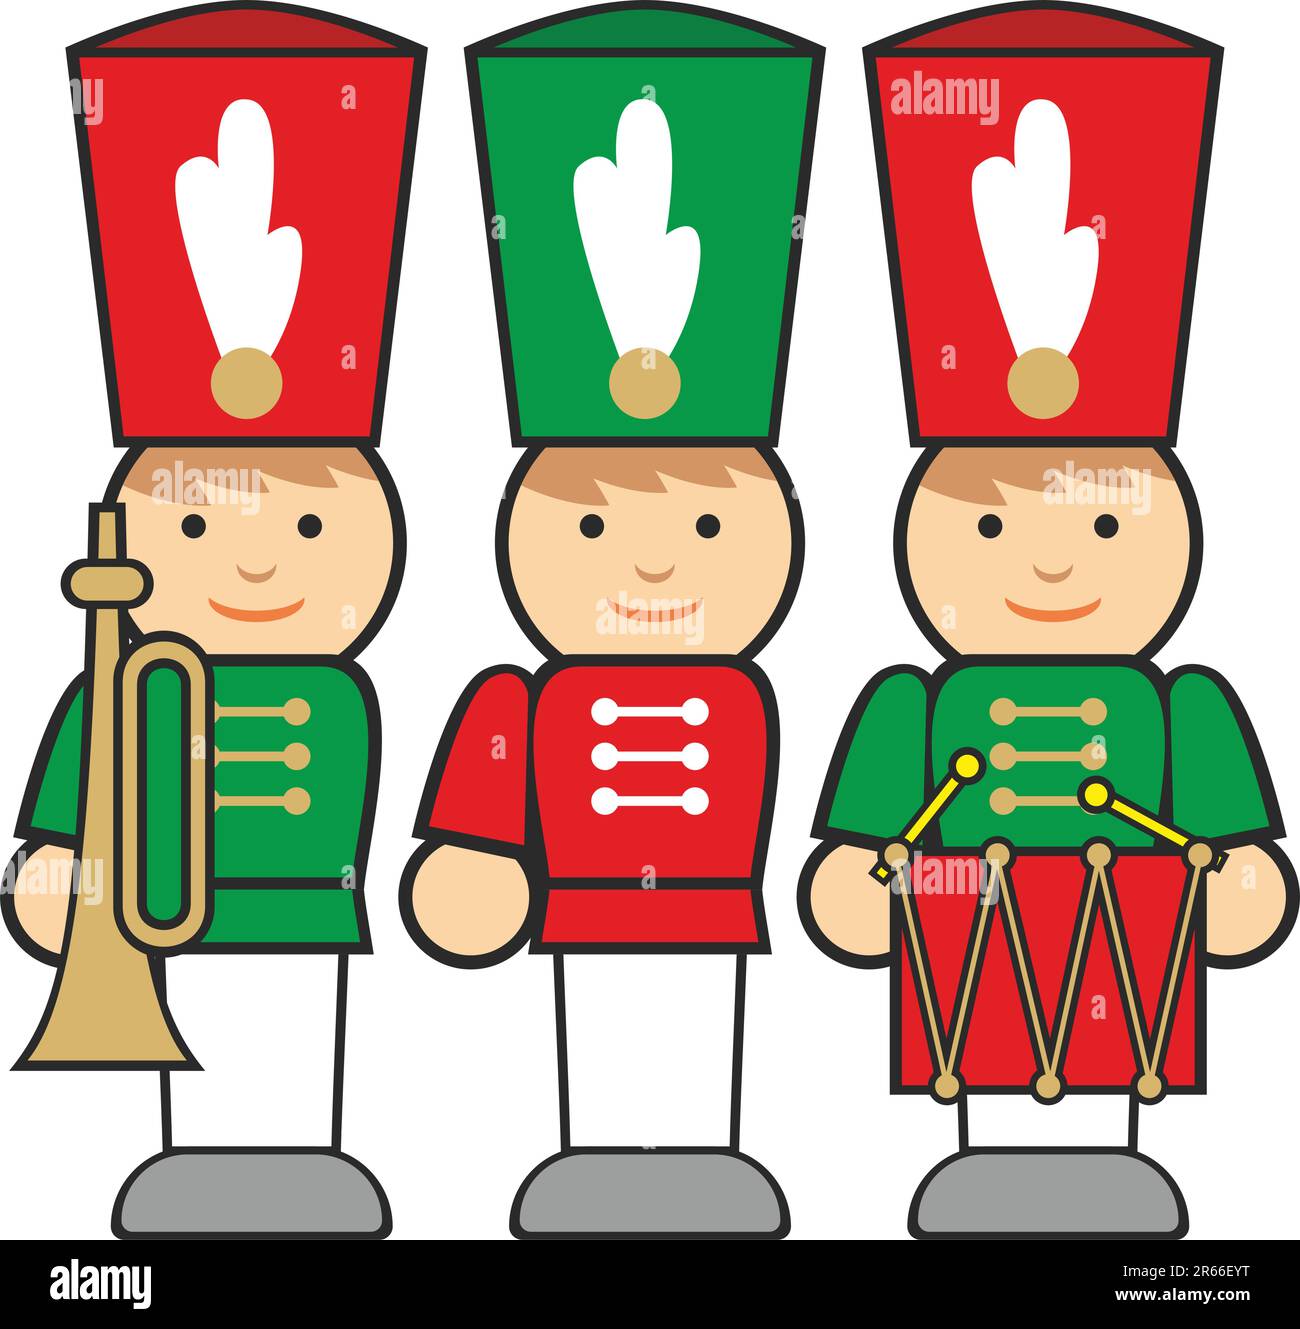 fully editable vector illustration of isolated wooden soldiers Stock Vector